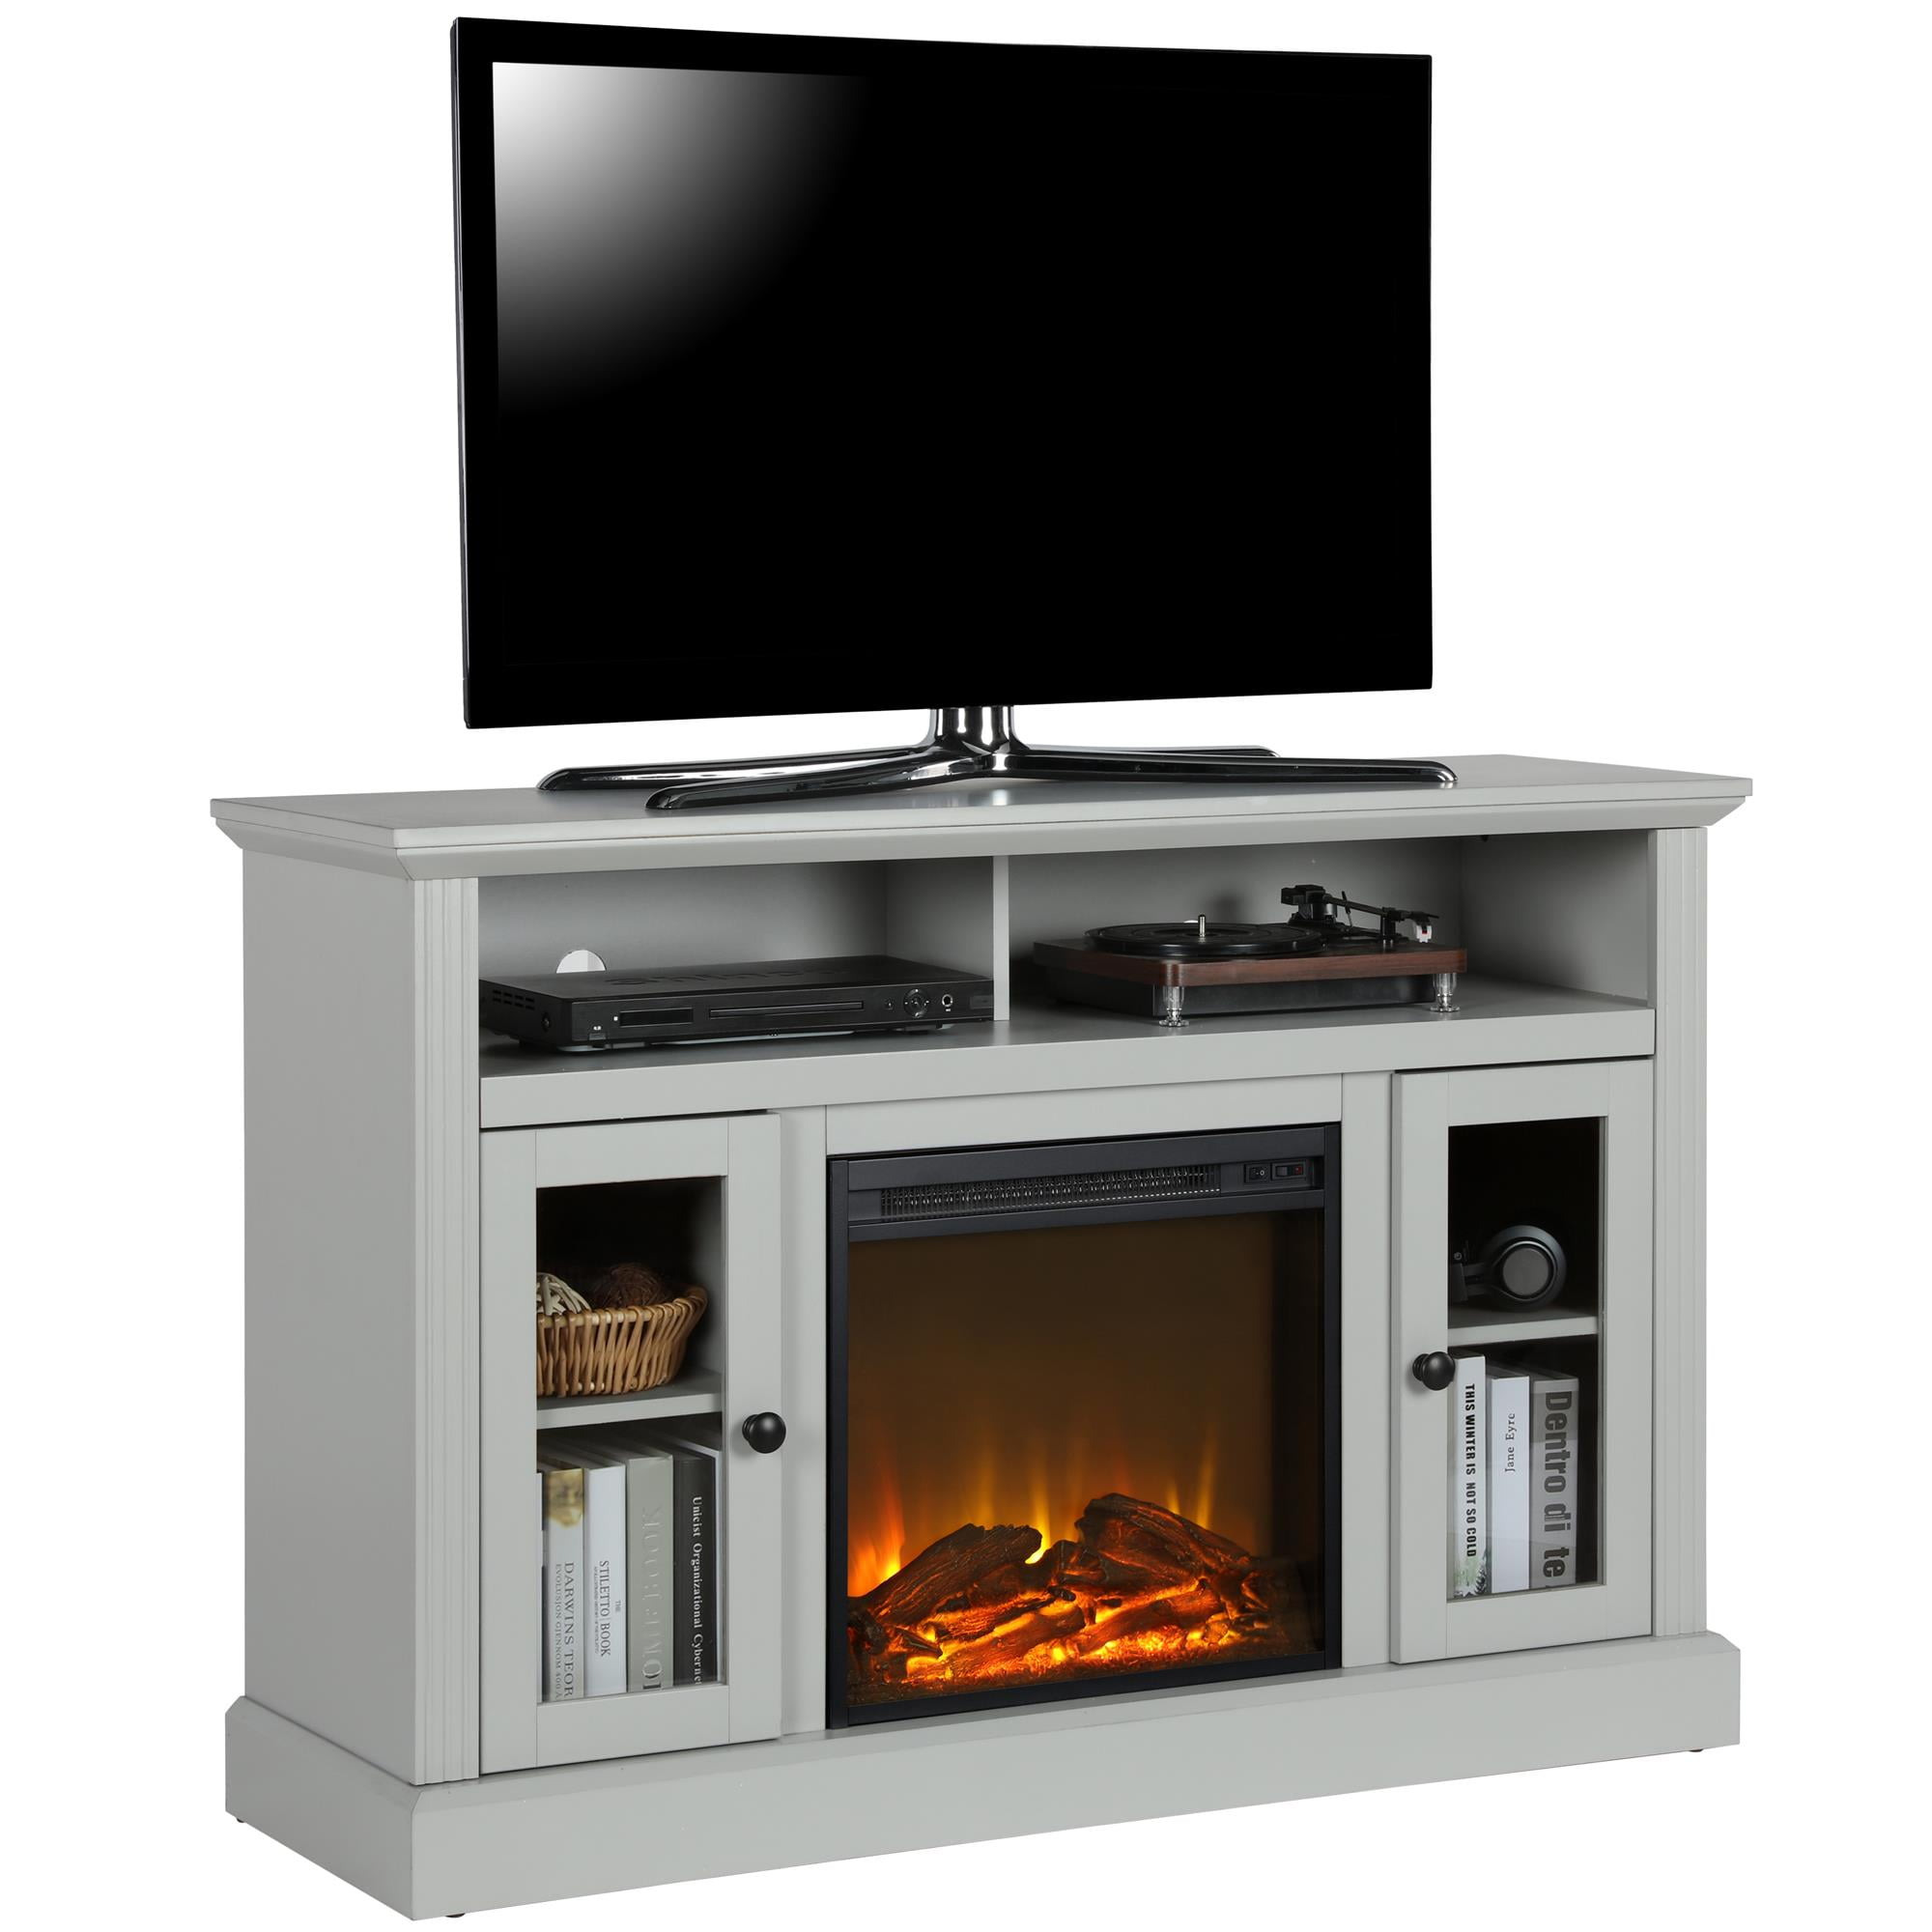 Ameriwood Home Chicago Fireplace 65 Rustic Oak TV Stand, 